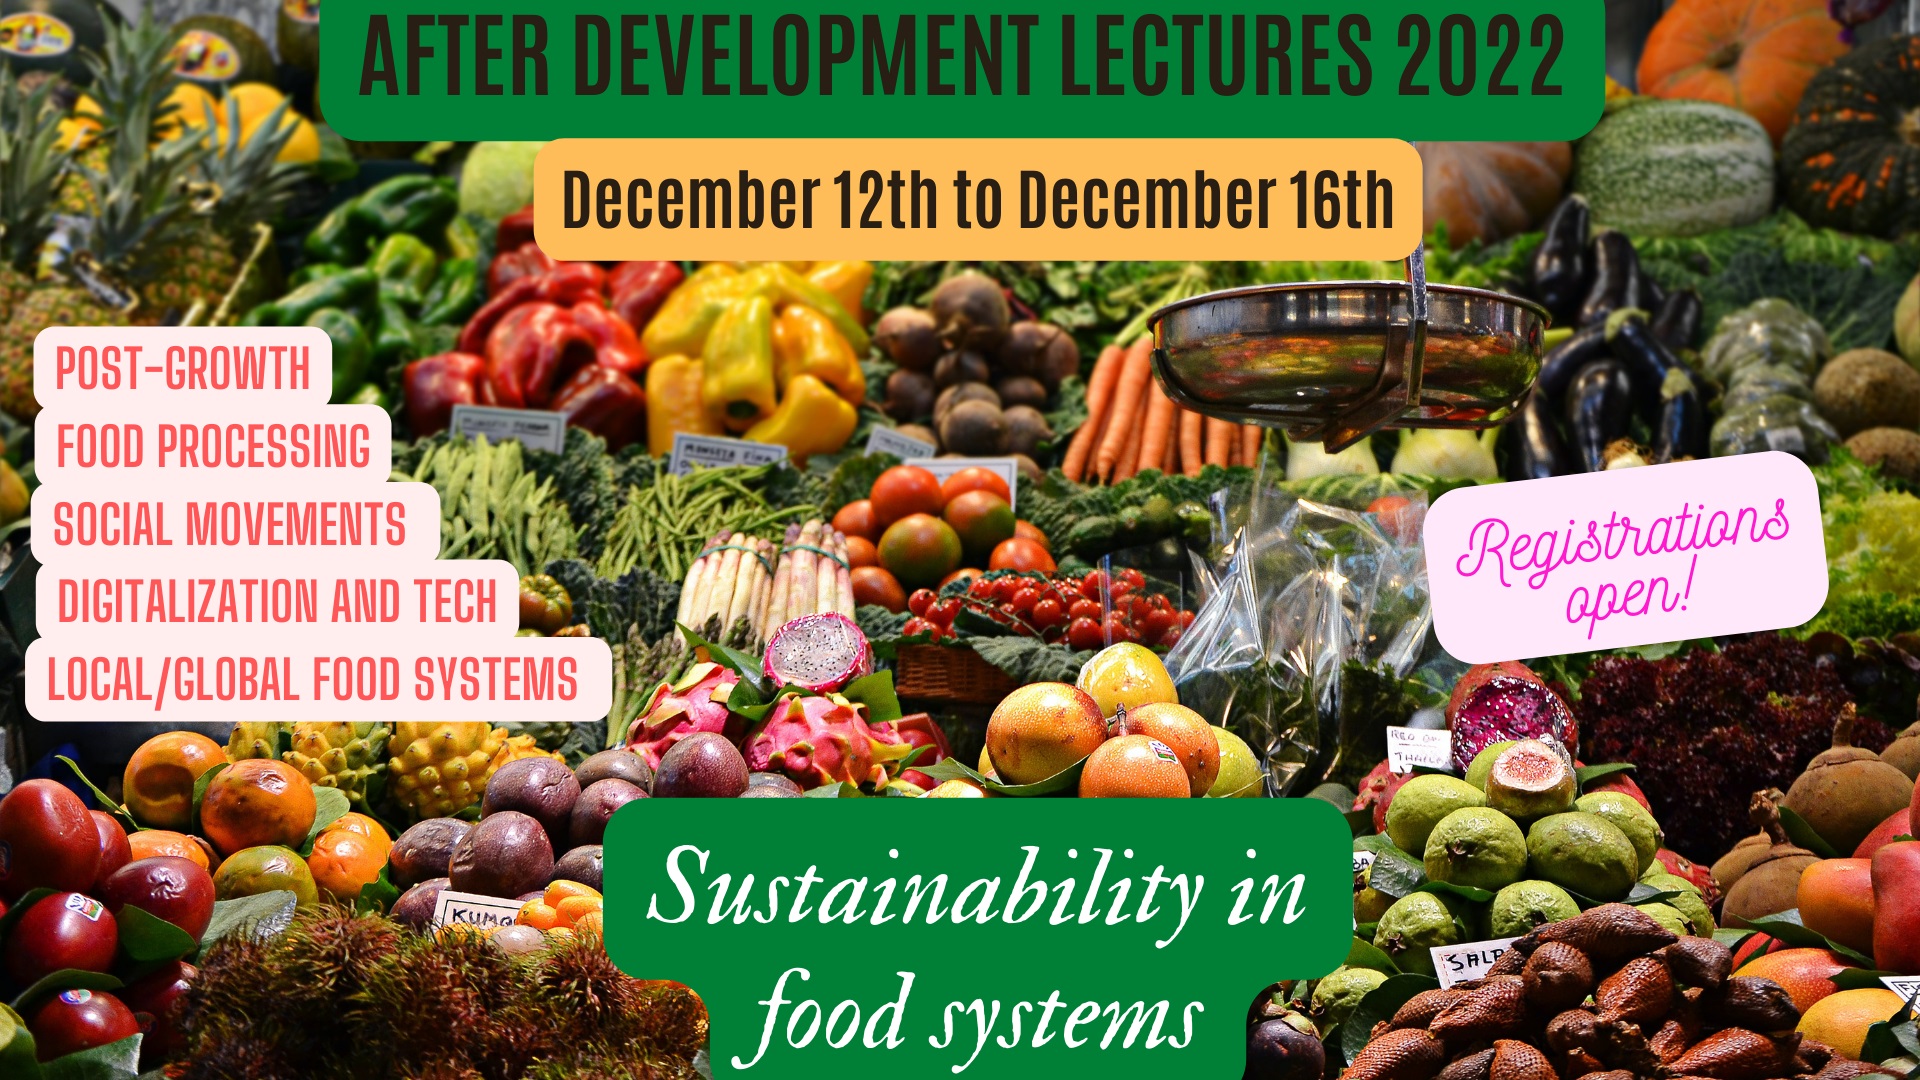 After developement lectures on food systems 2022